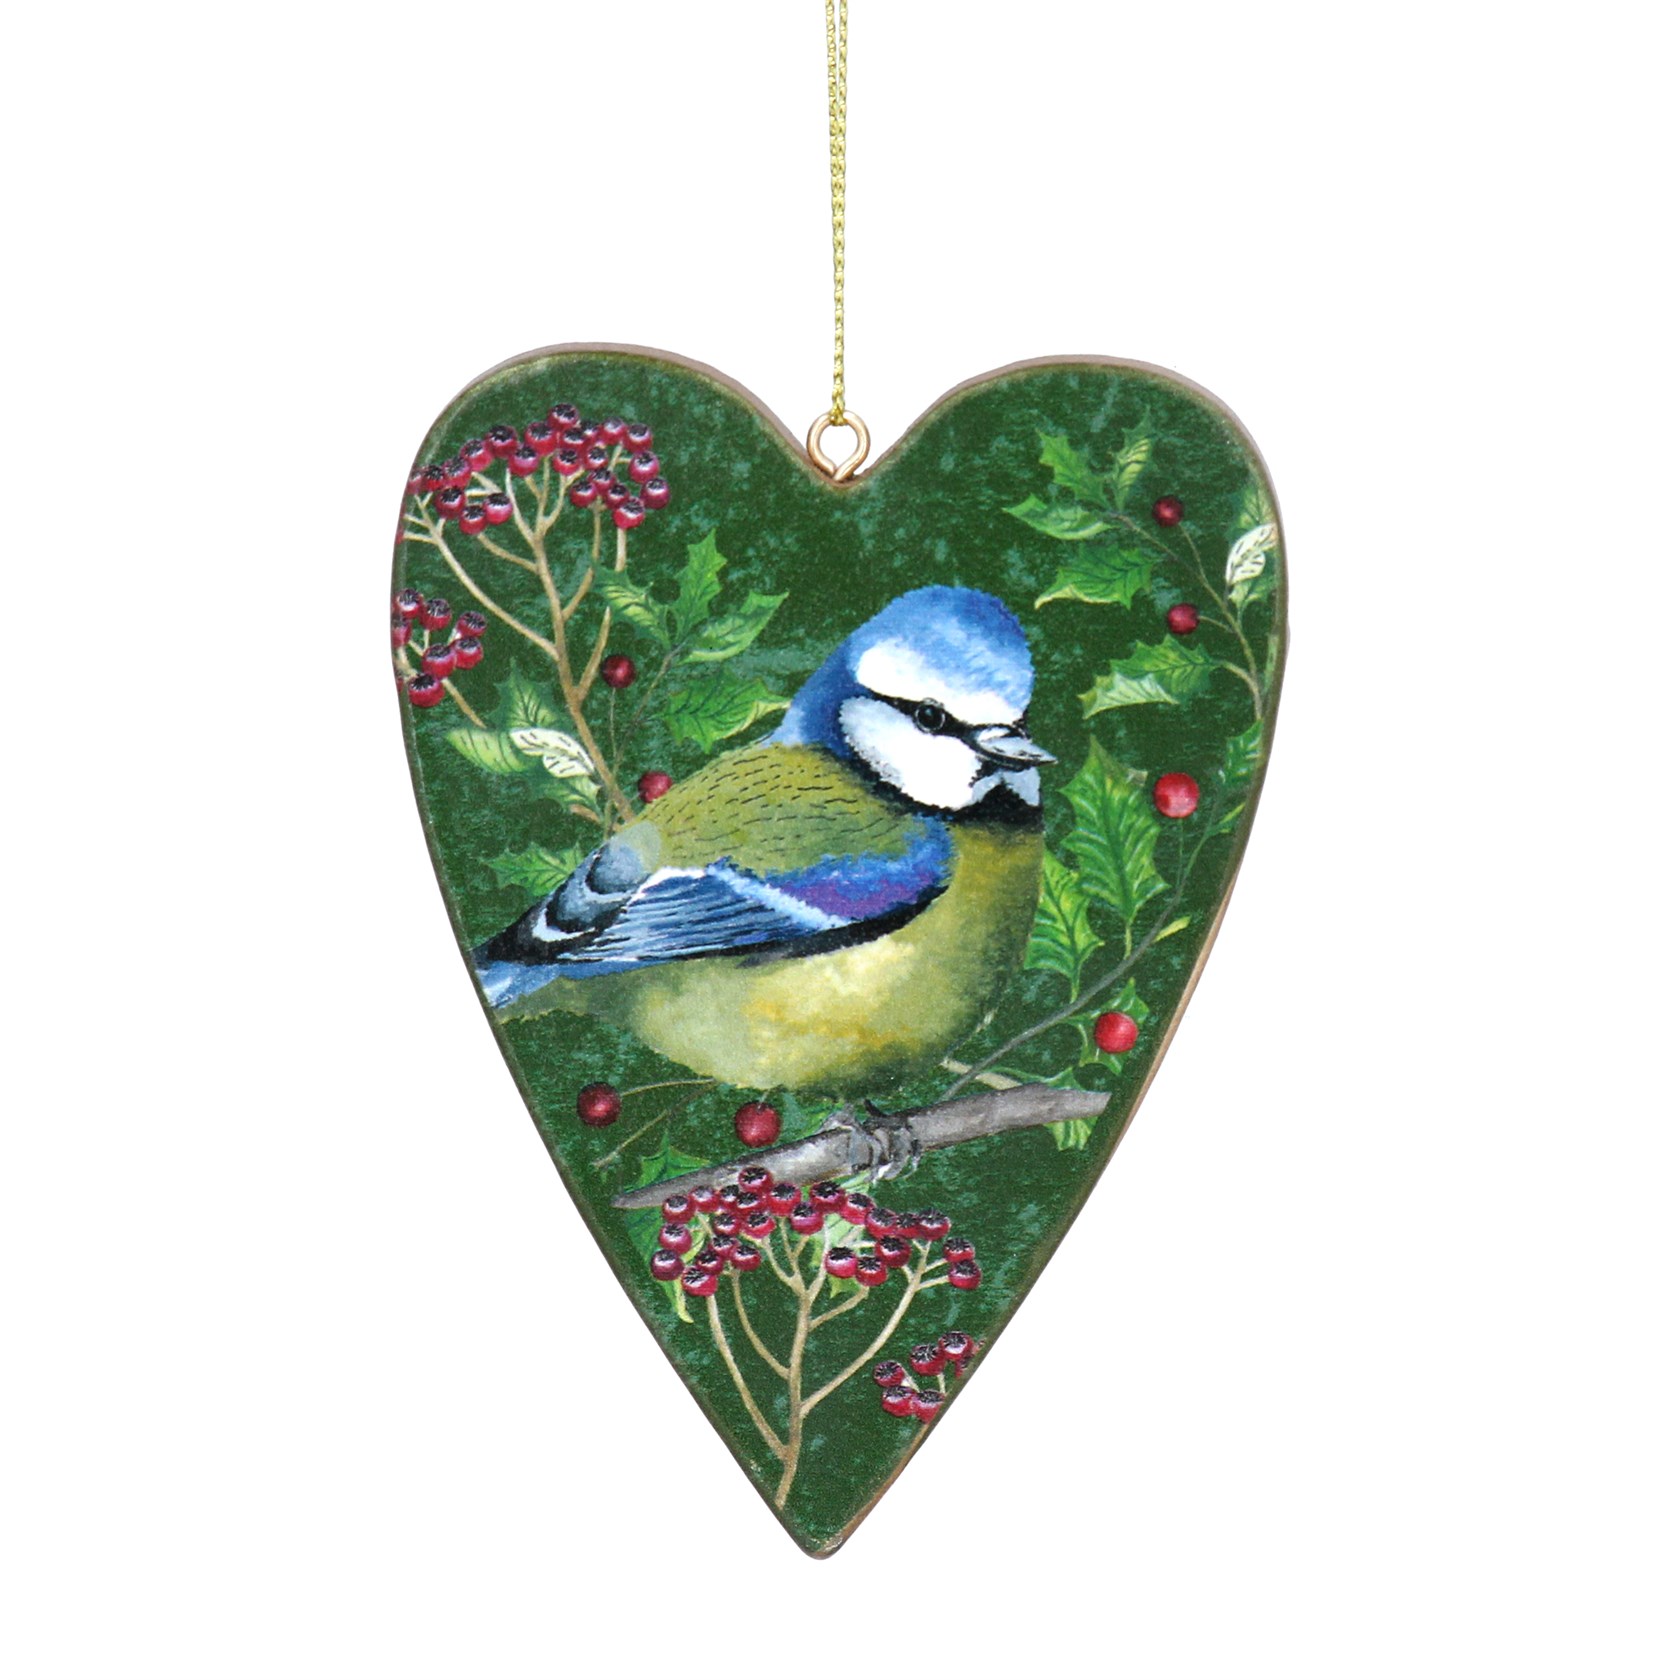 Green wooden heart Christmas hanging decoration with Bluetit and berries design. By Gisela Graham. The perfect festive addition to your home.